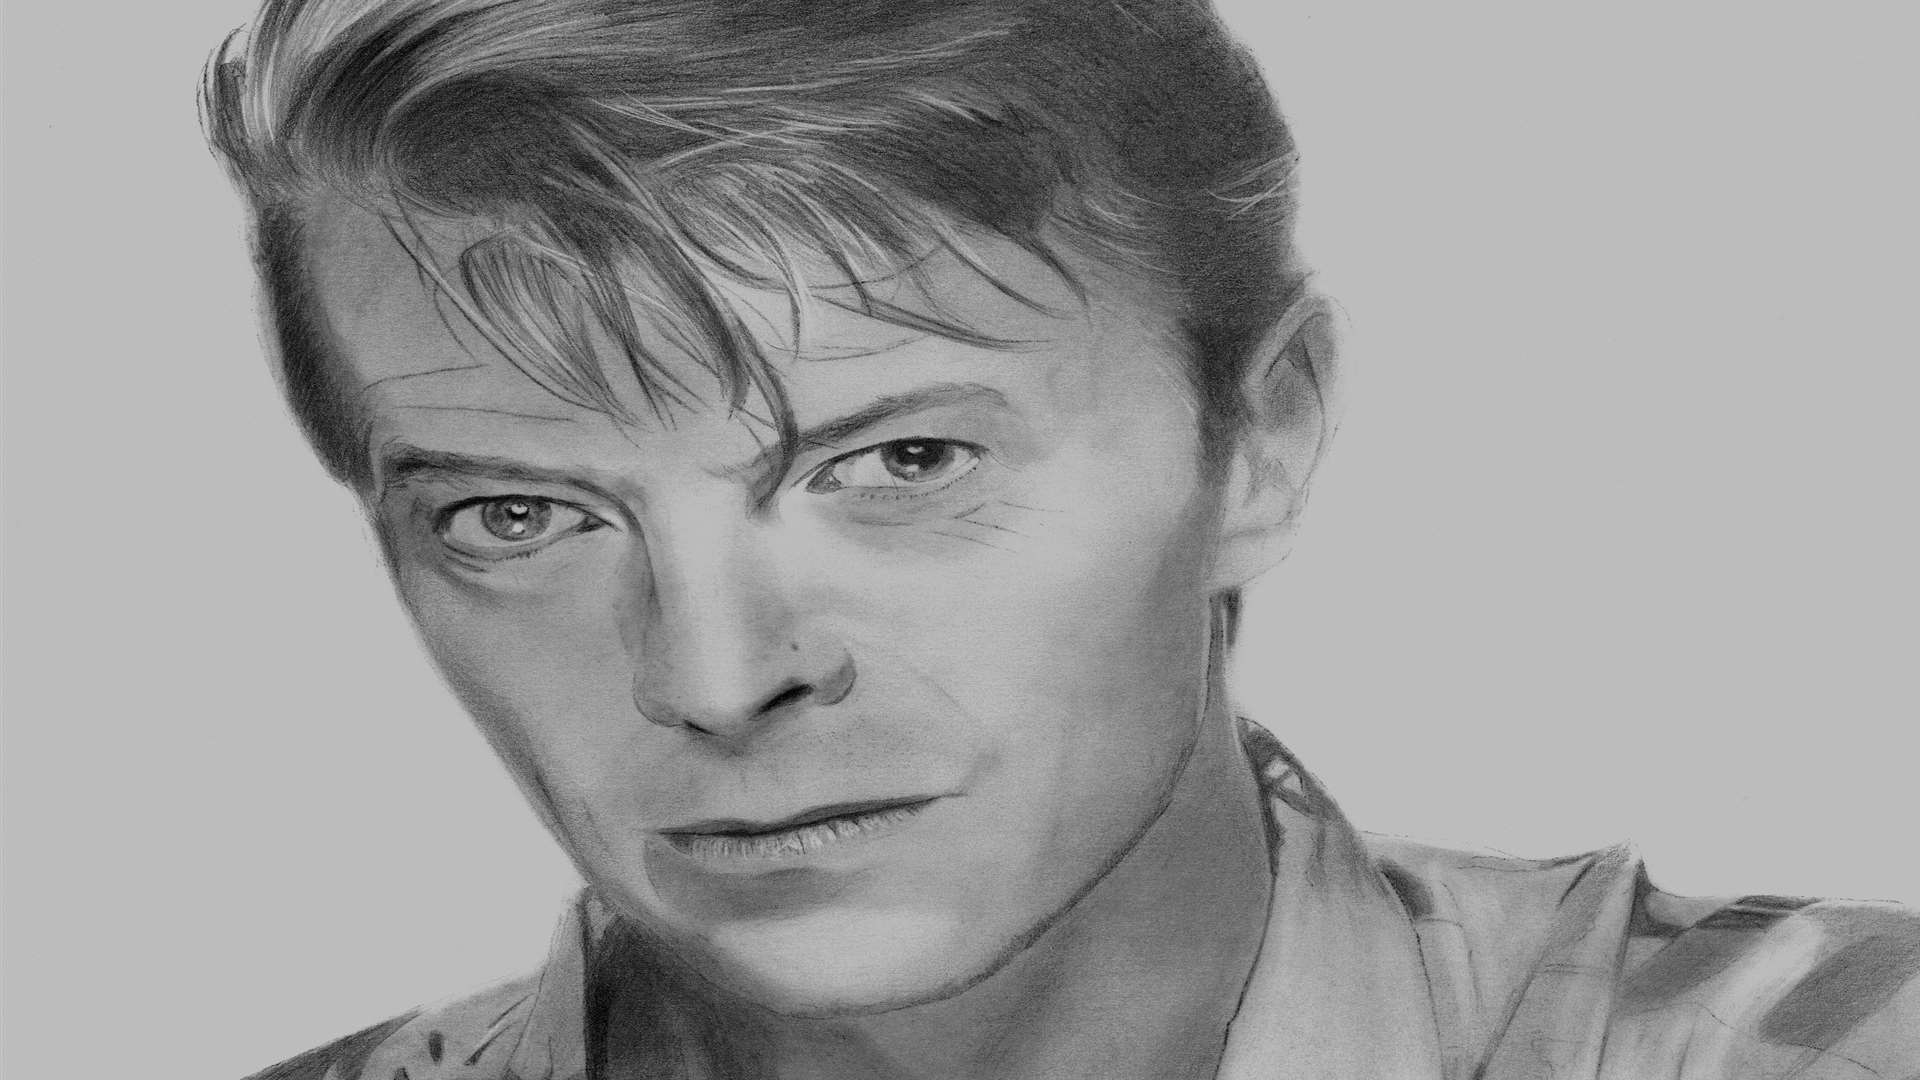 Artist Jay Pritchard's stunning David Bowie sketch is being auctioned in aid of The Stacey Mowle Appeal